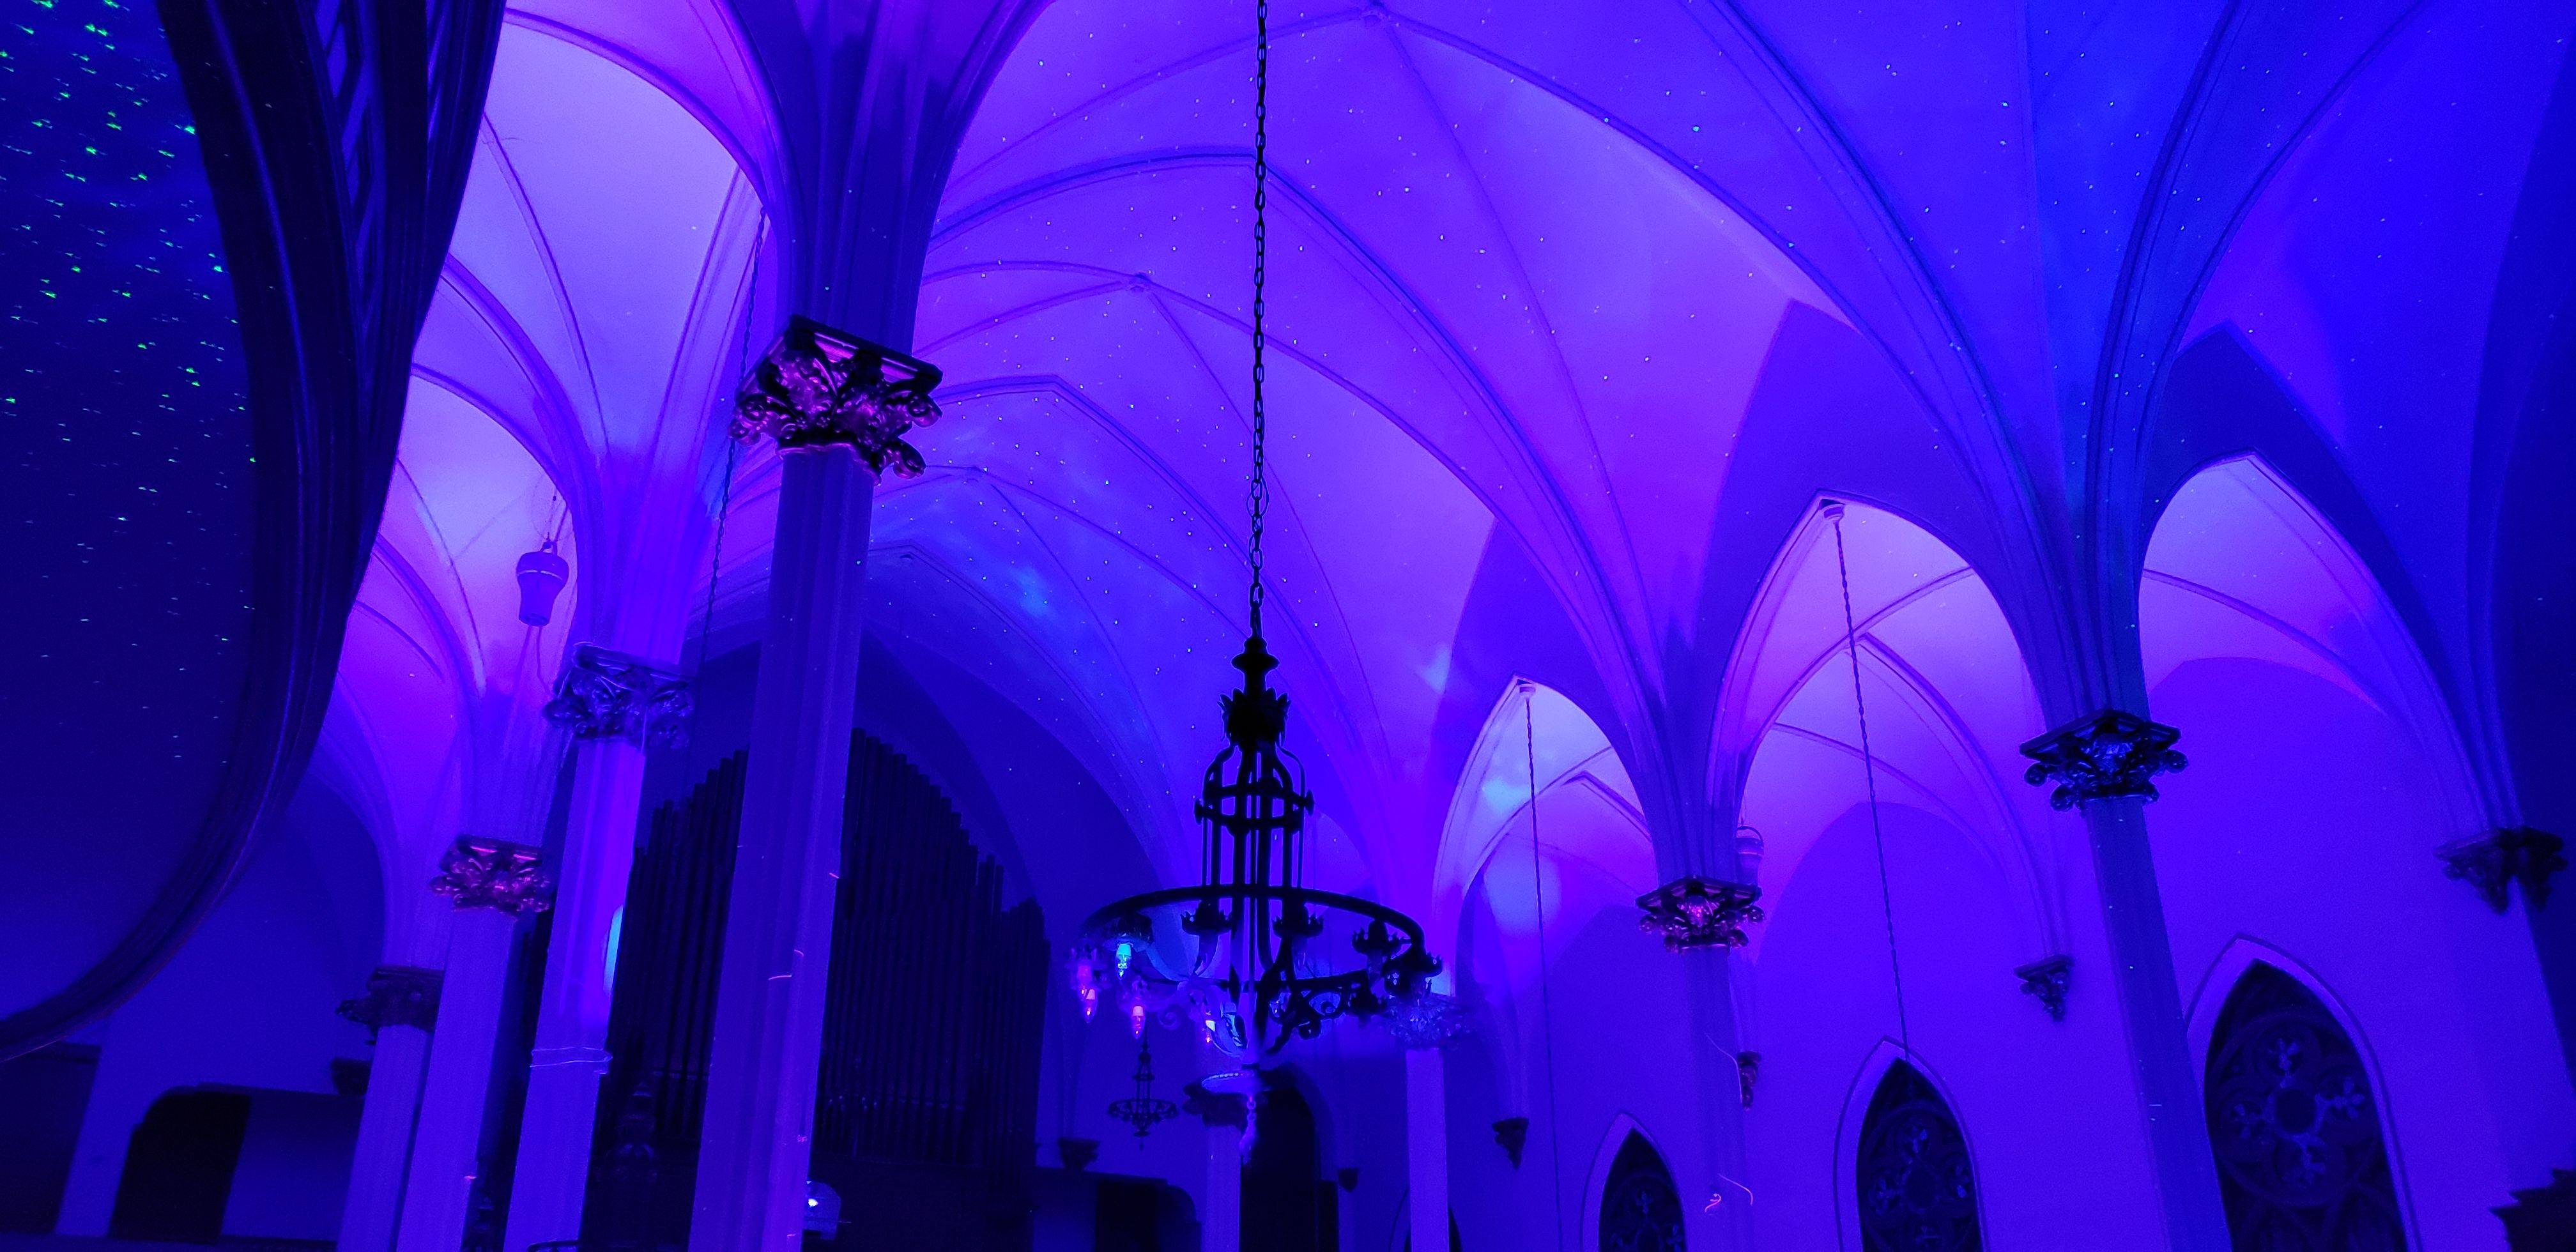 Blue and Purple up lighting with stars and Northern Lights on the ceiling.